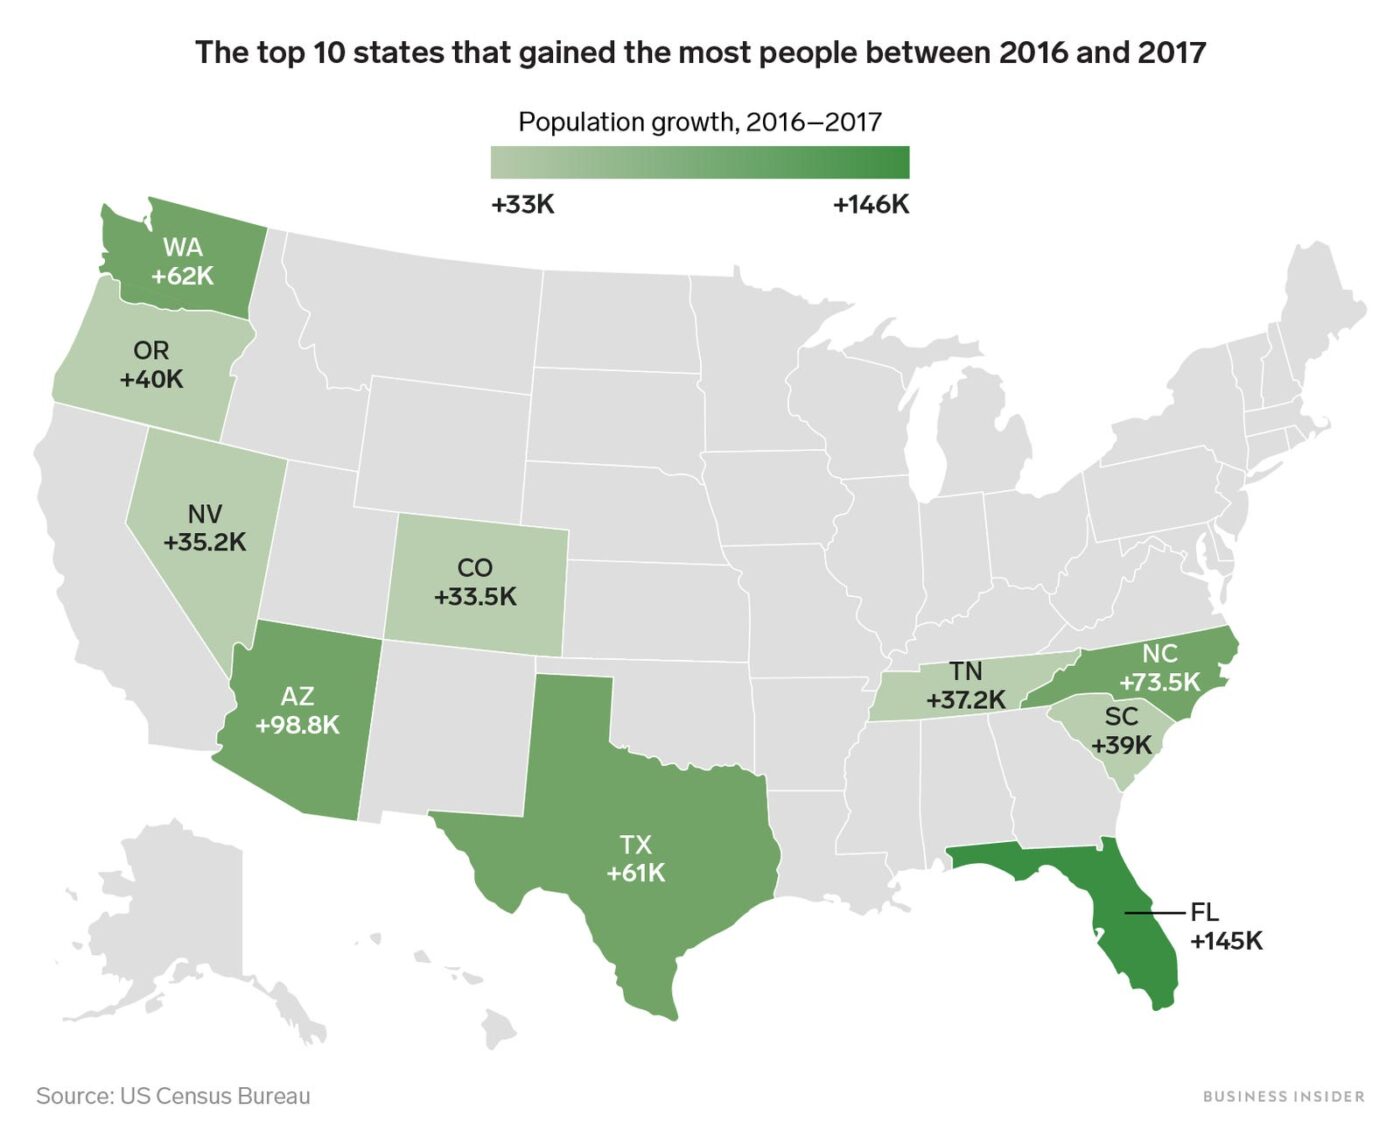 Why are more people moving to Florida then anywhere else in the U.S.